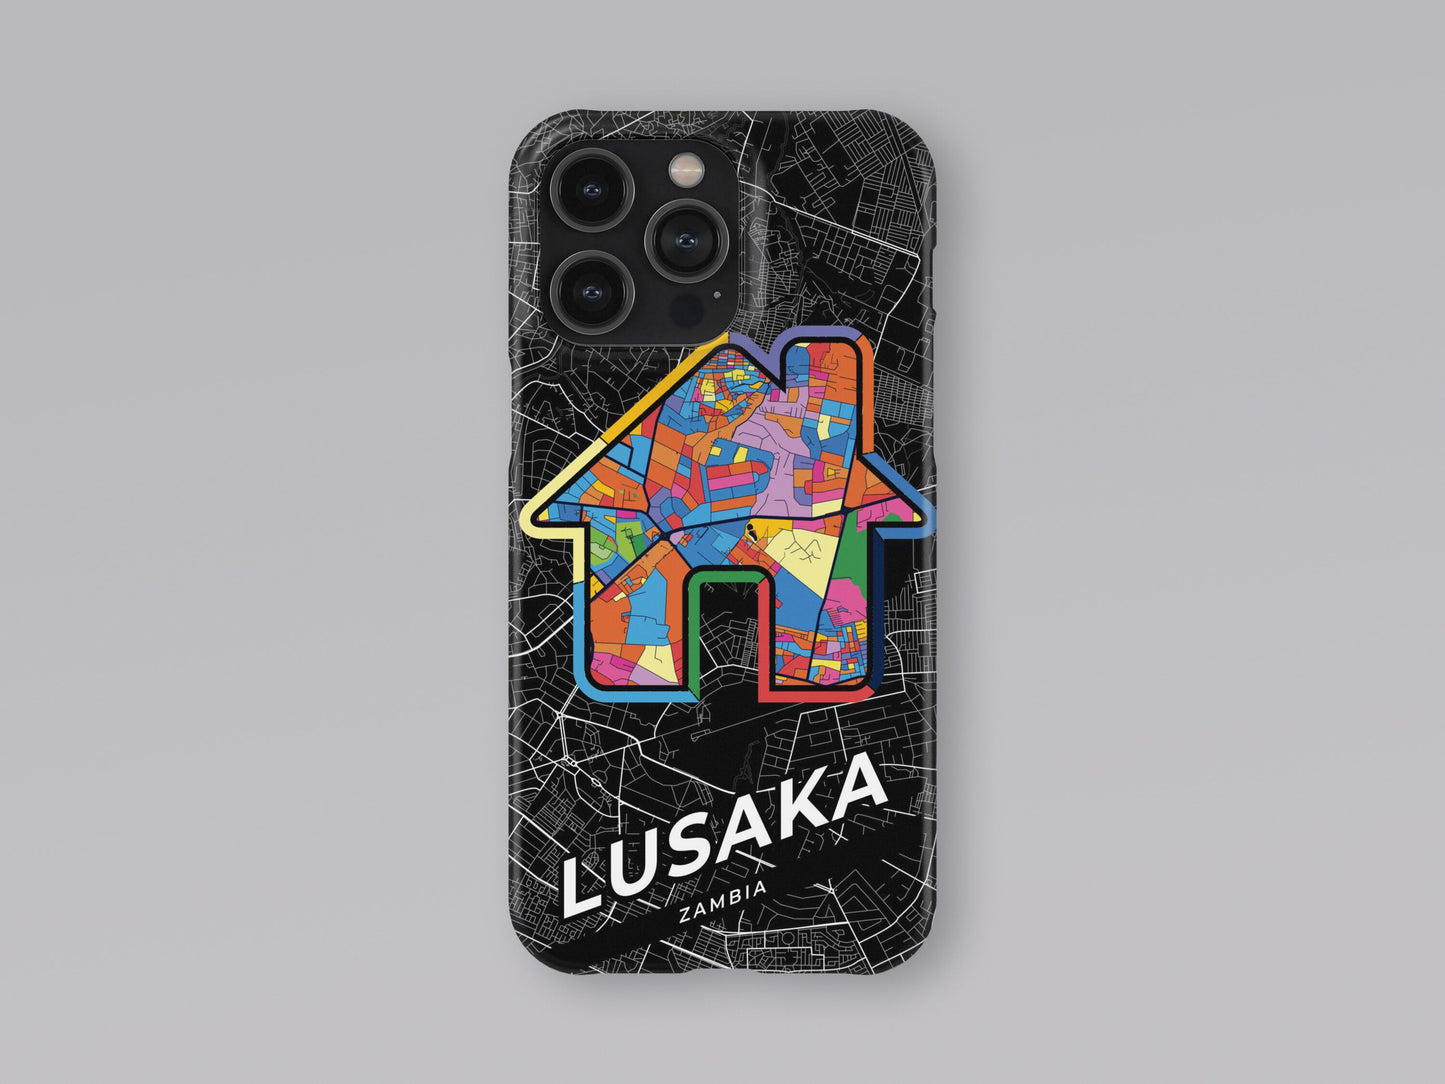 Lusaka Zambia slim phone case with colorful icon. Birthday, wedding or housewarming gift. Couple match cases. 3